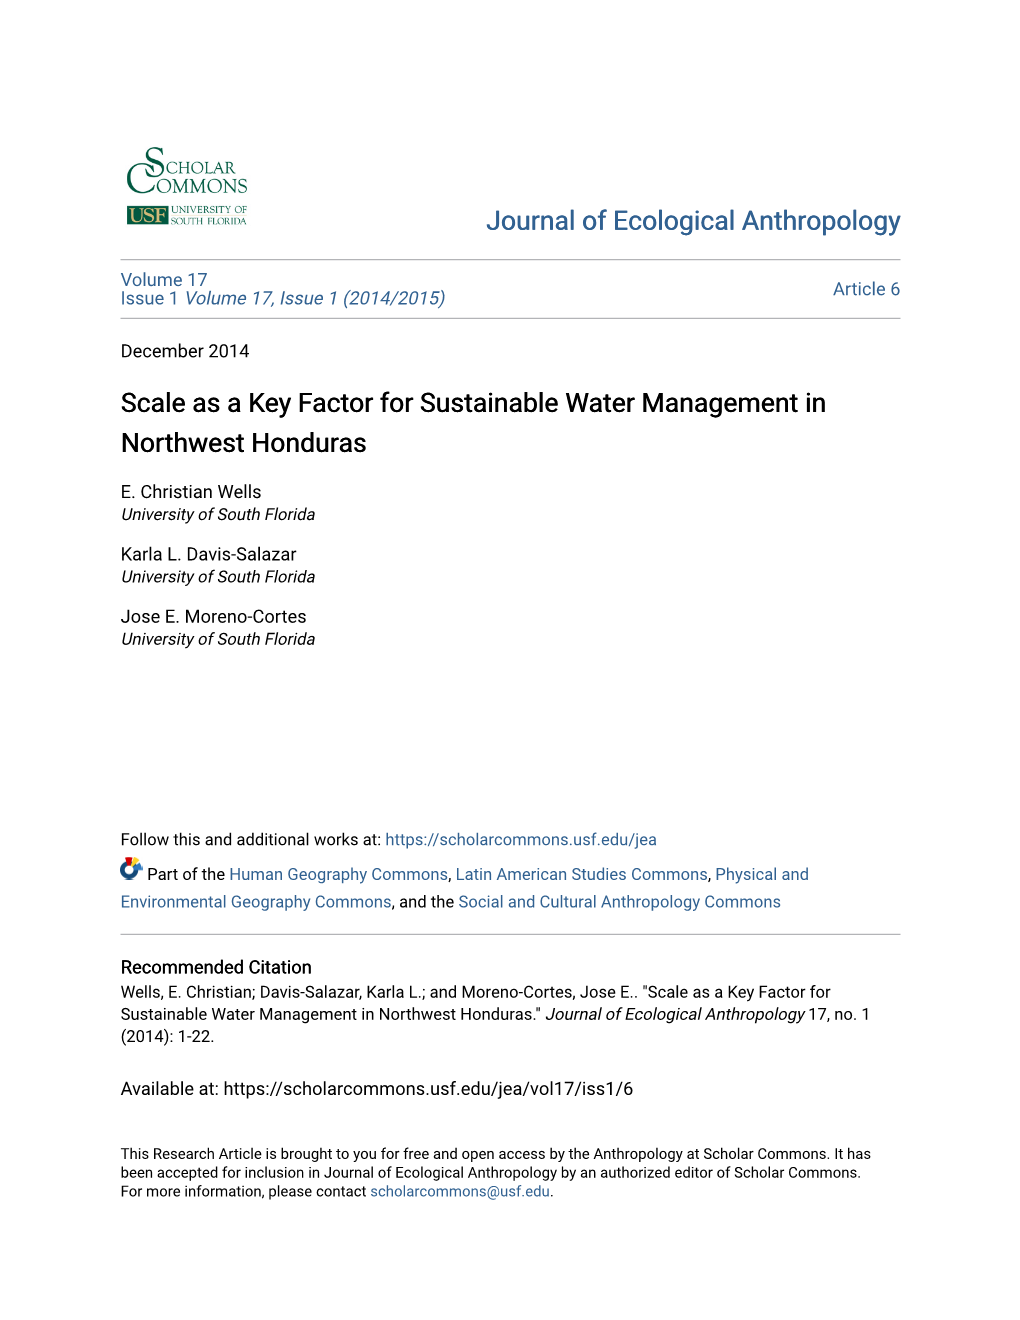 Scale As a Key Factor for Sustainable Water Management in Northwest Honduras